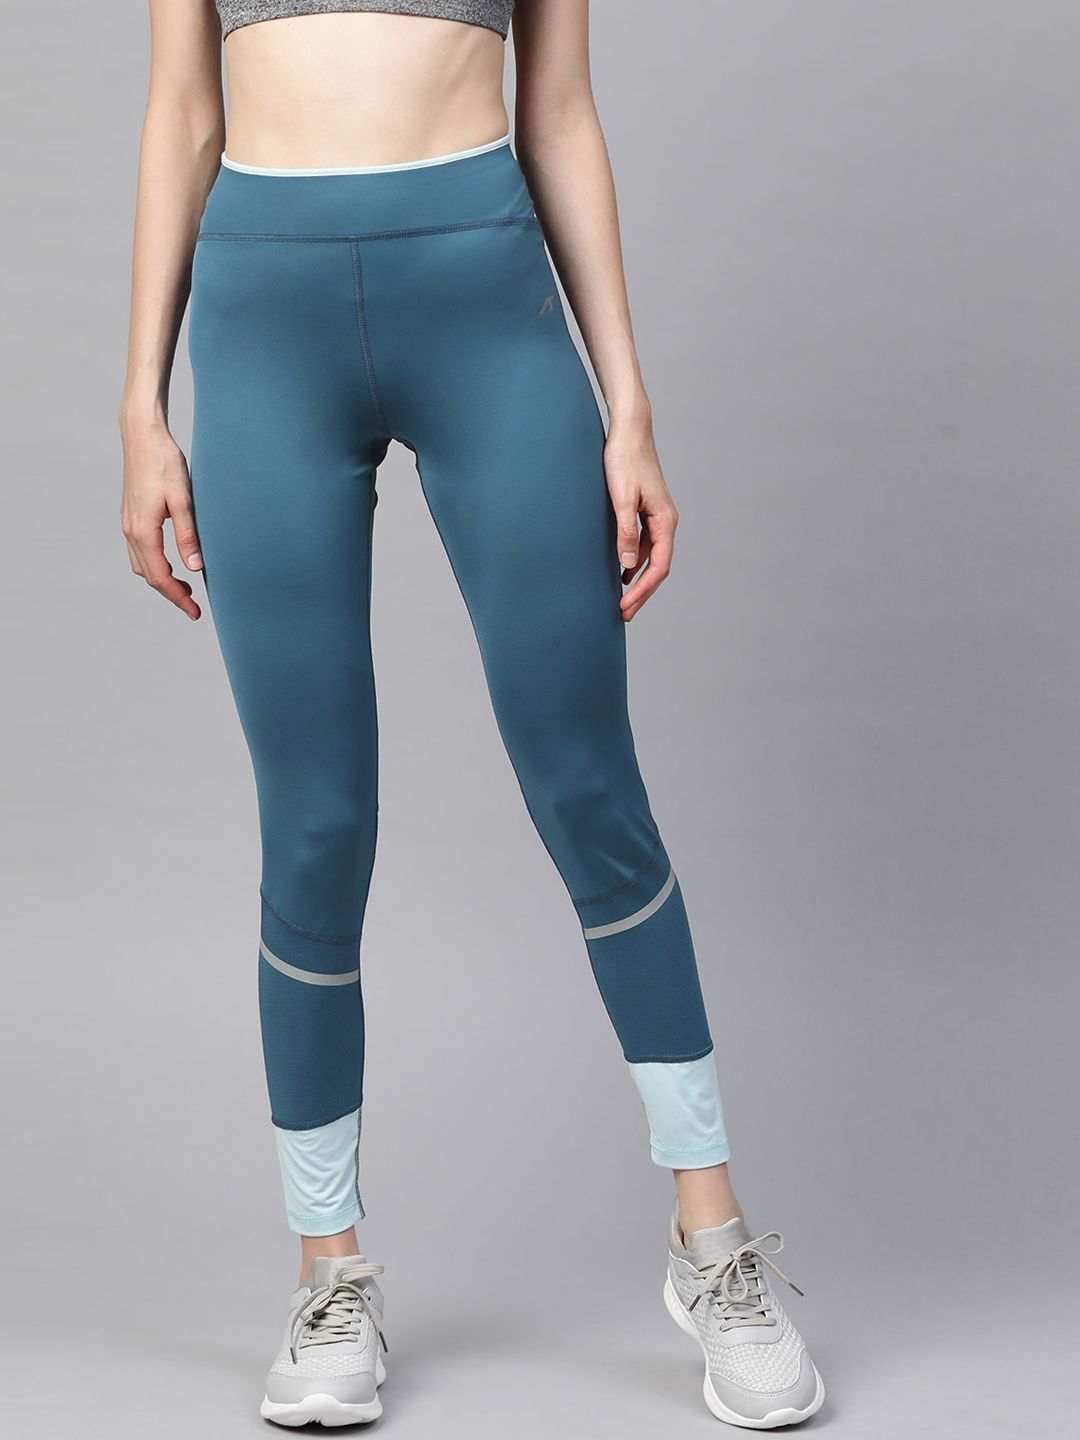 Alcis Women Teal Blue Solid Cropped Tights Price in India